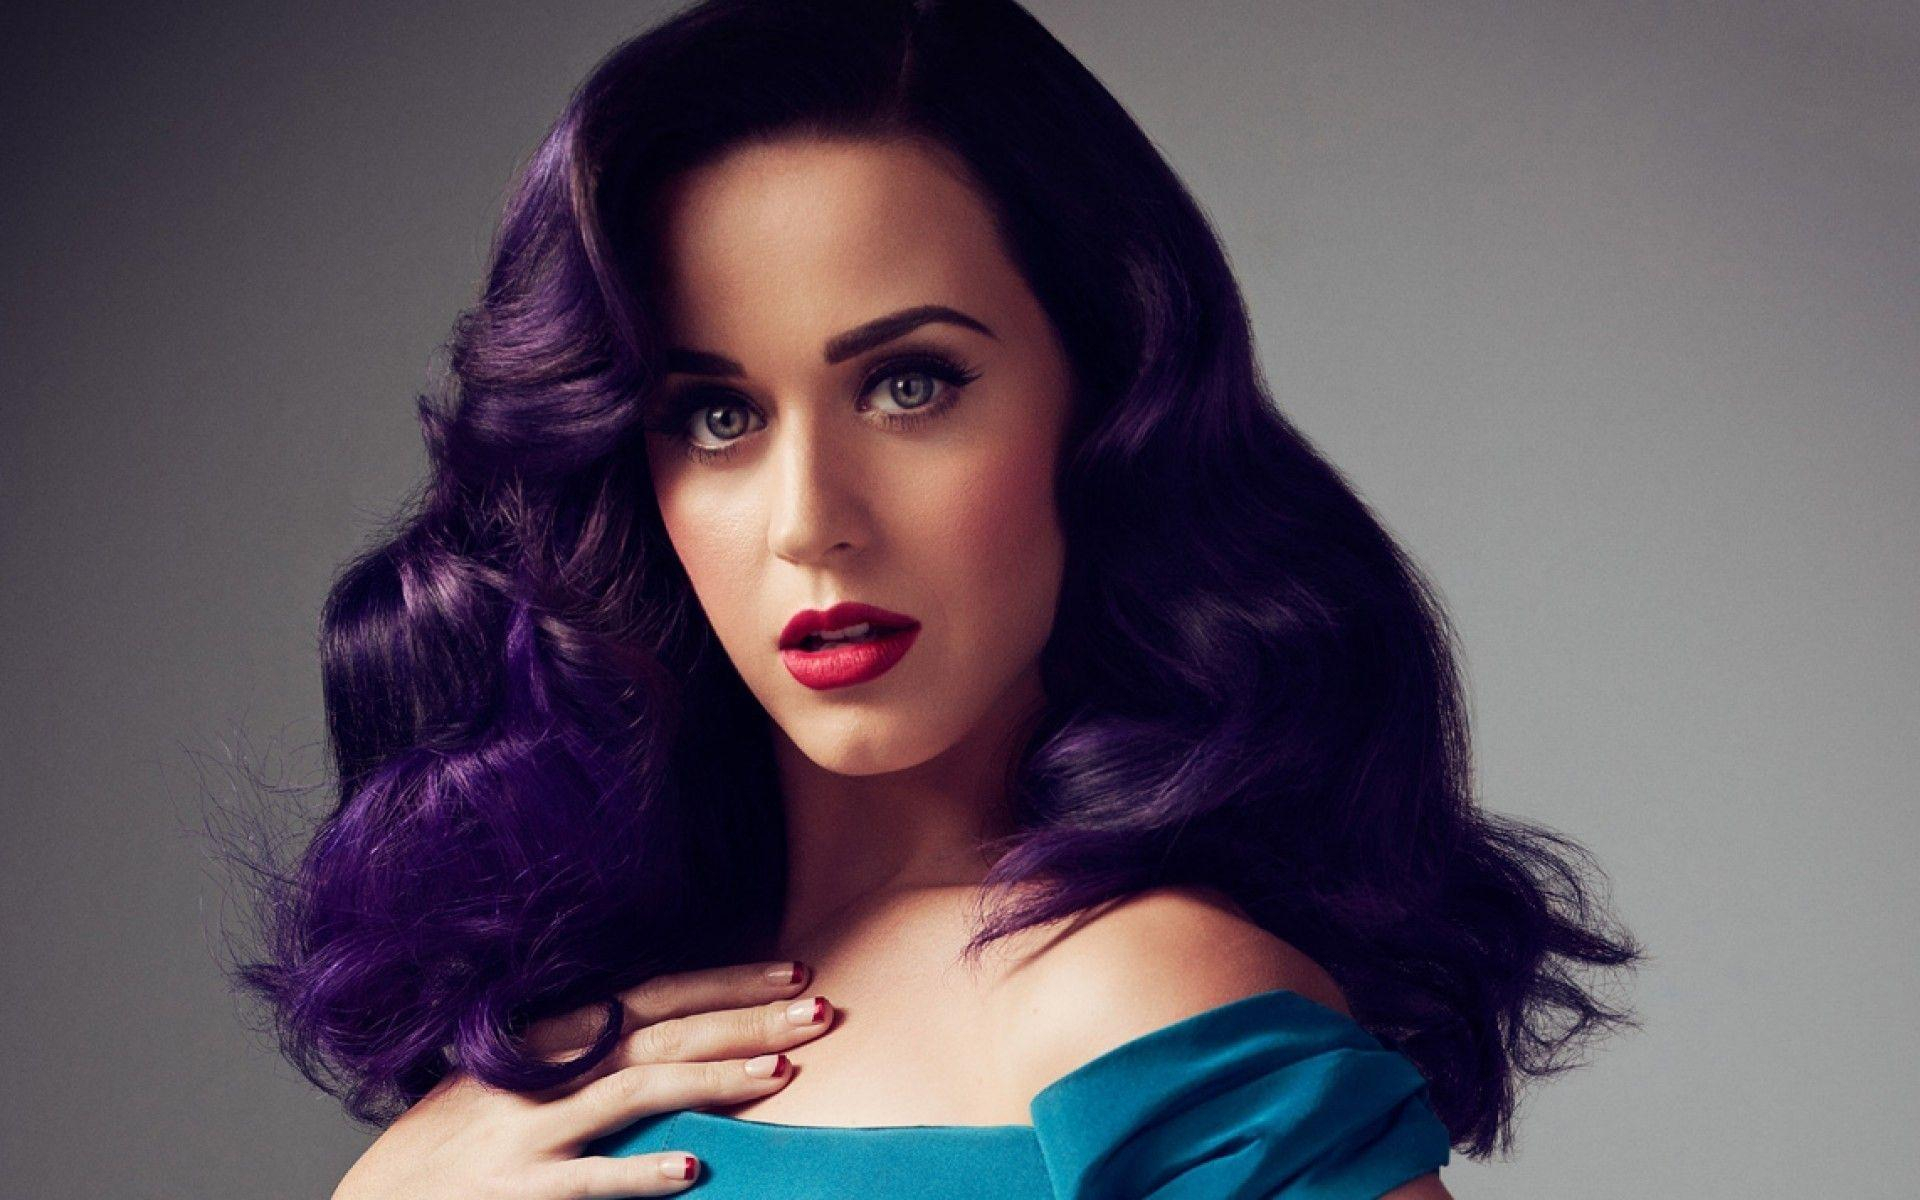 10 Best Katy Perry Hd Wallpapers FULL HD 1920×1080 For PC Background